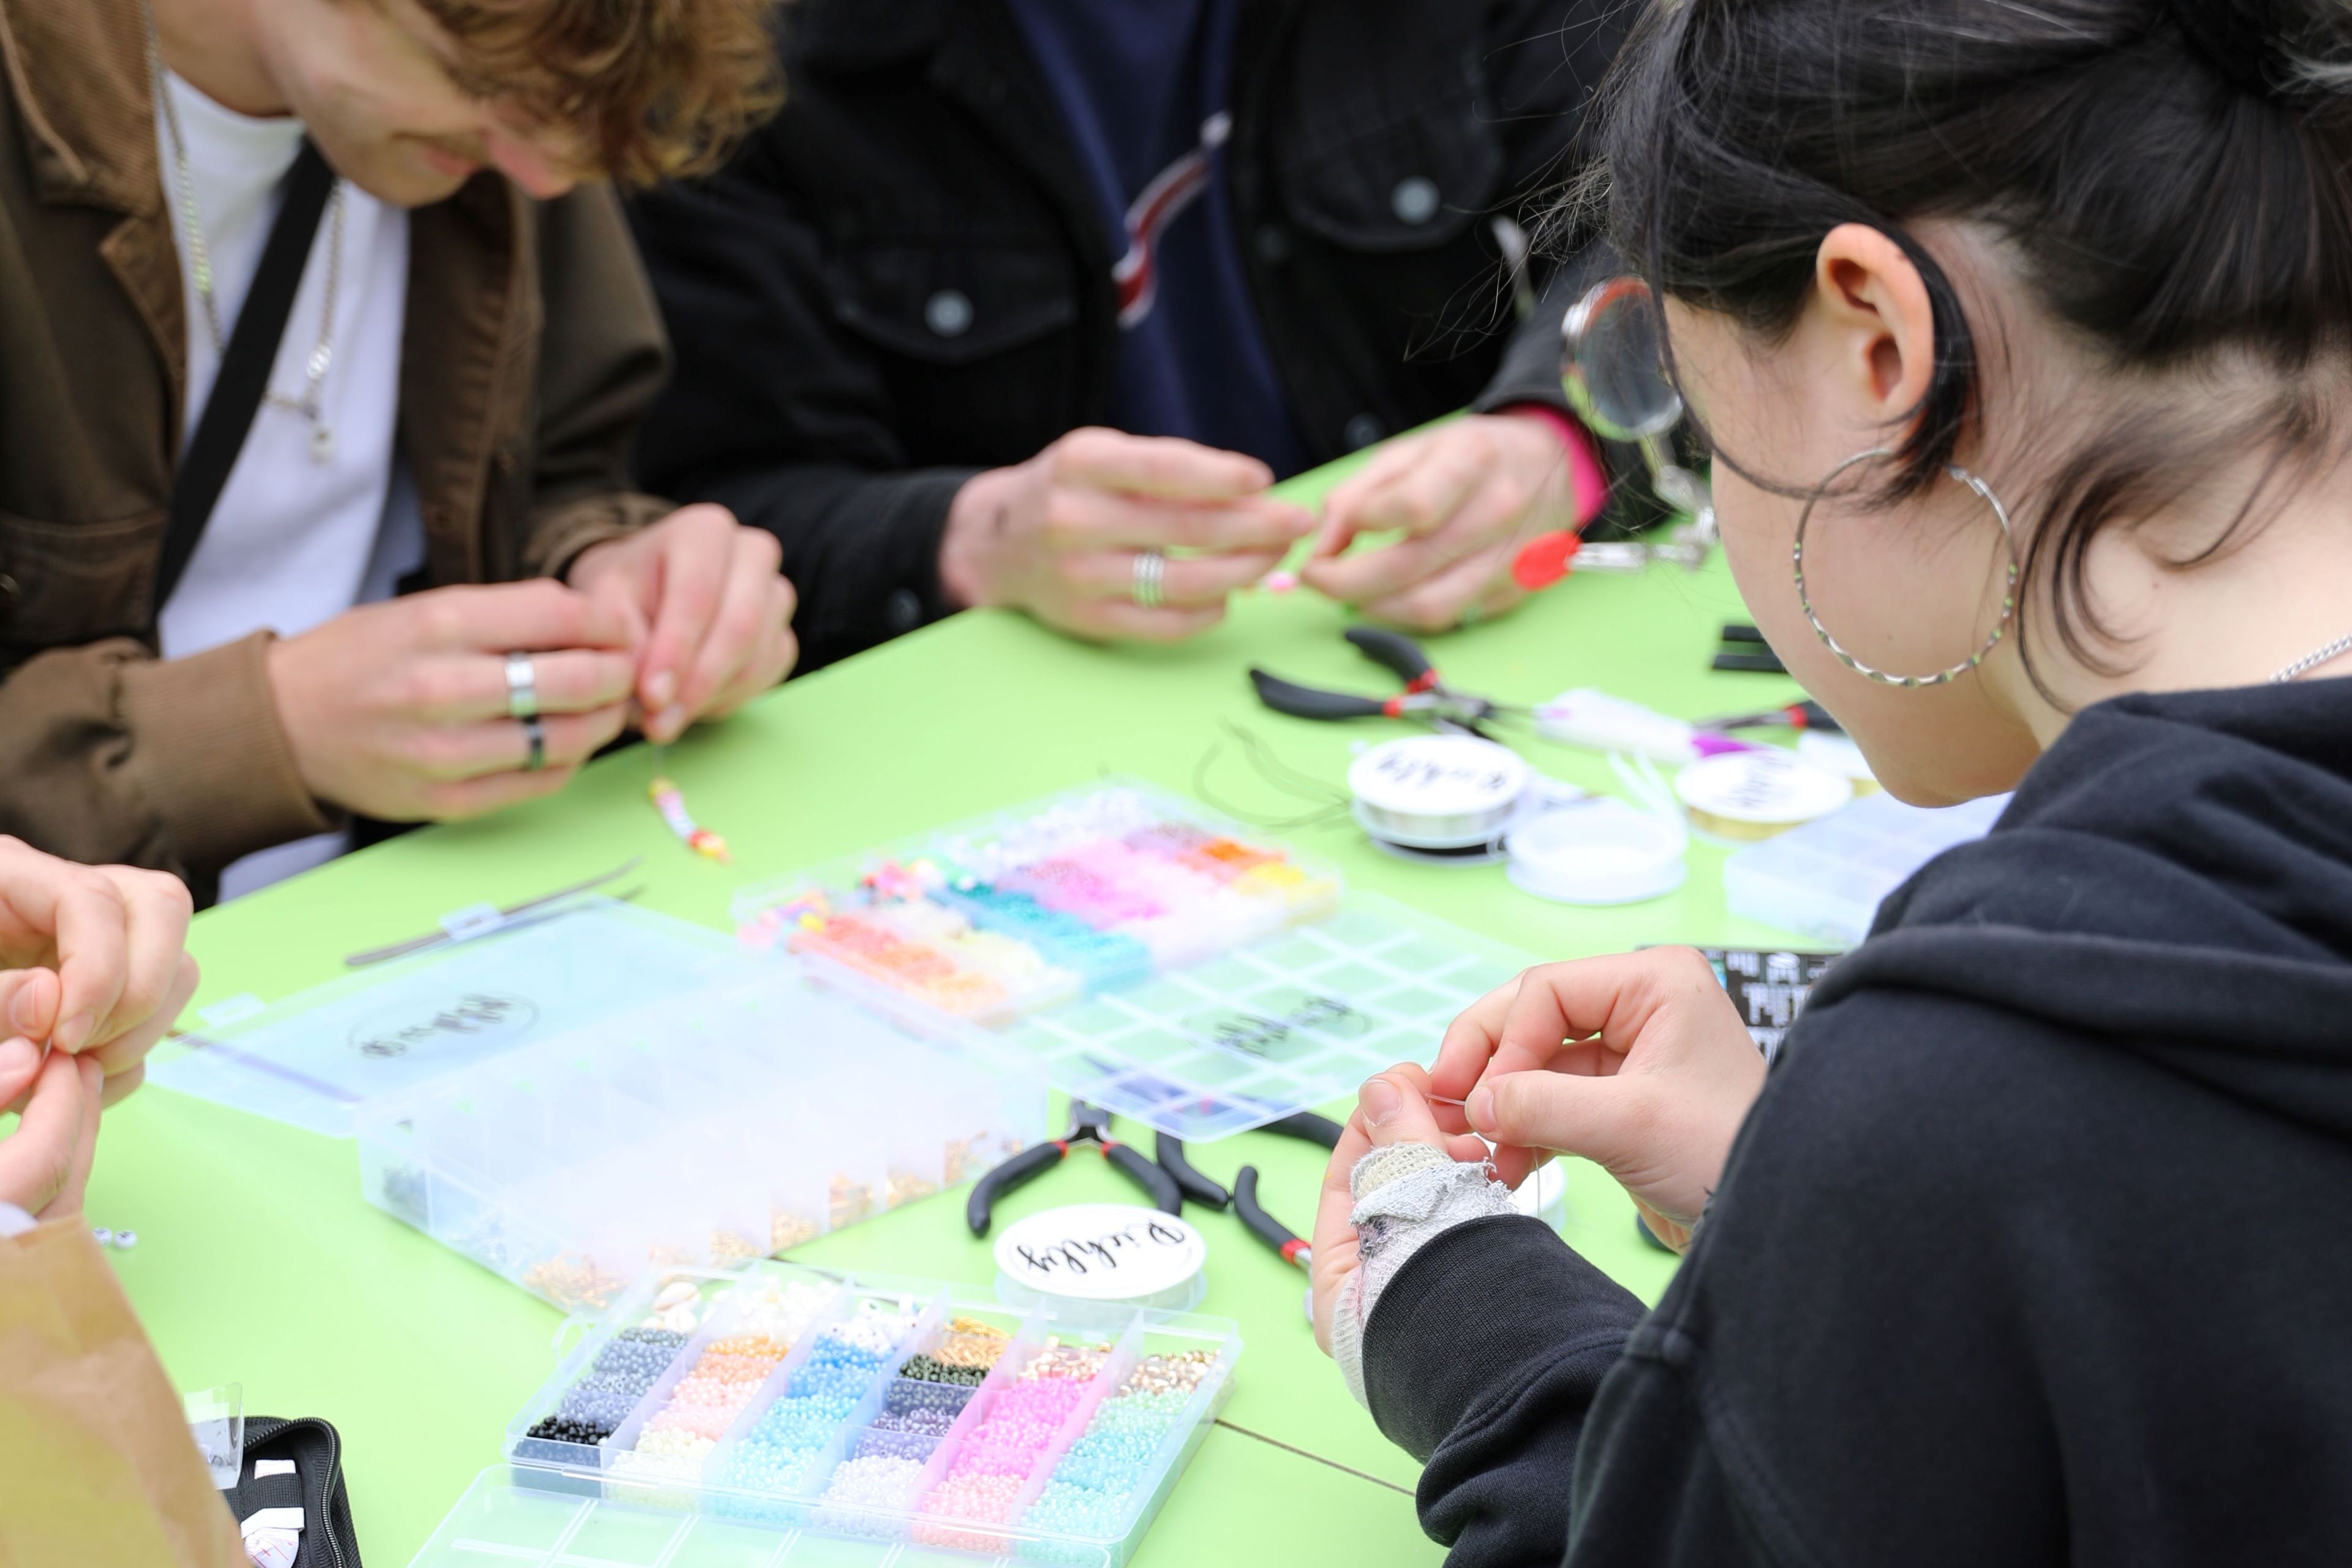 Jewellery making during outside the box festival.